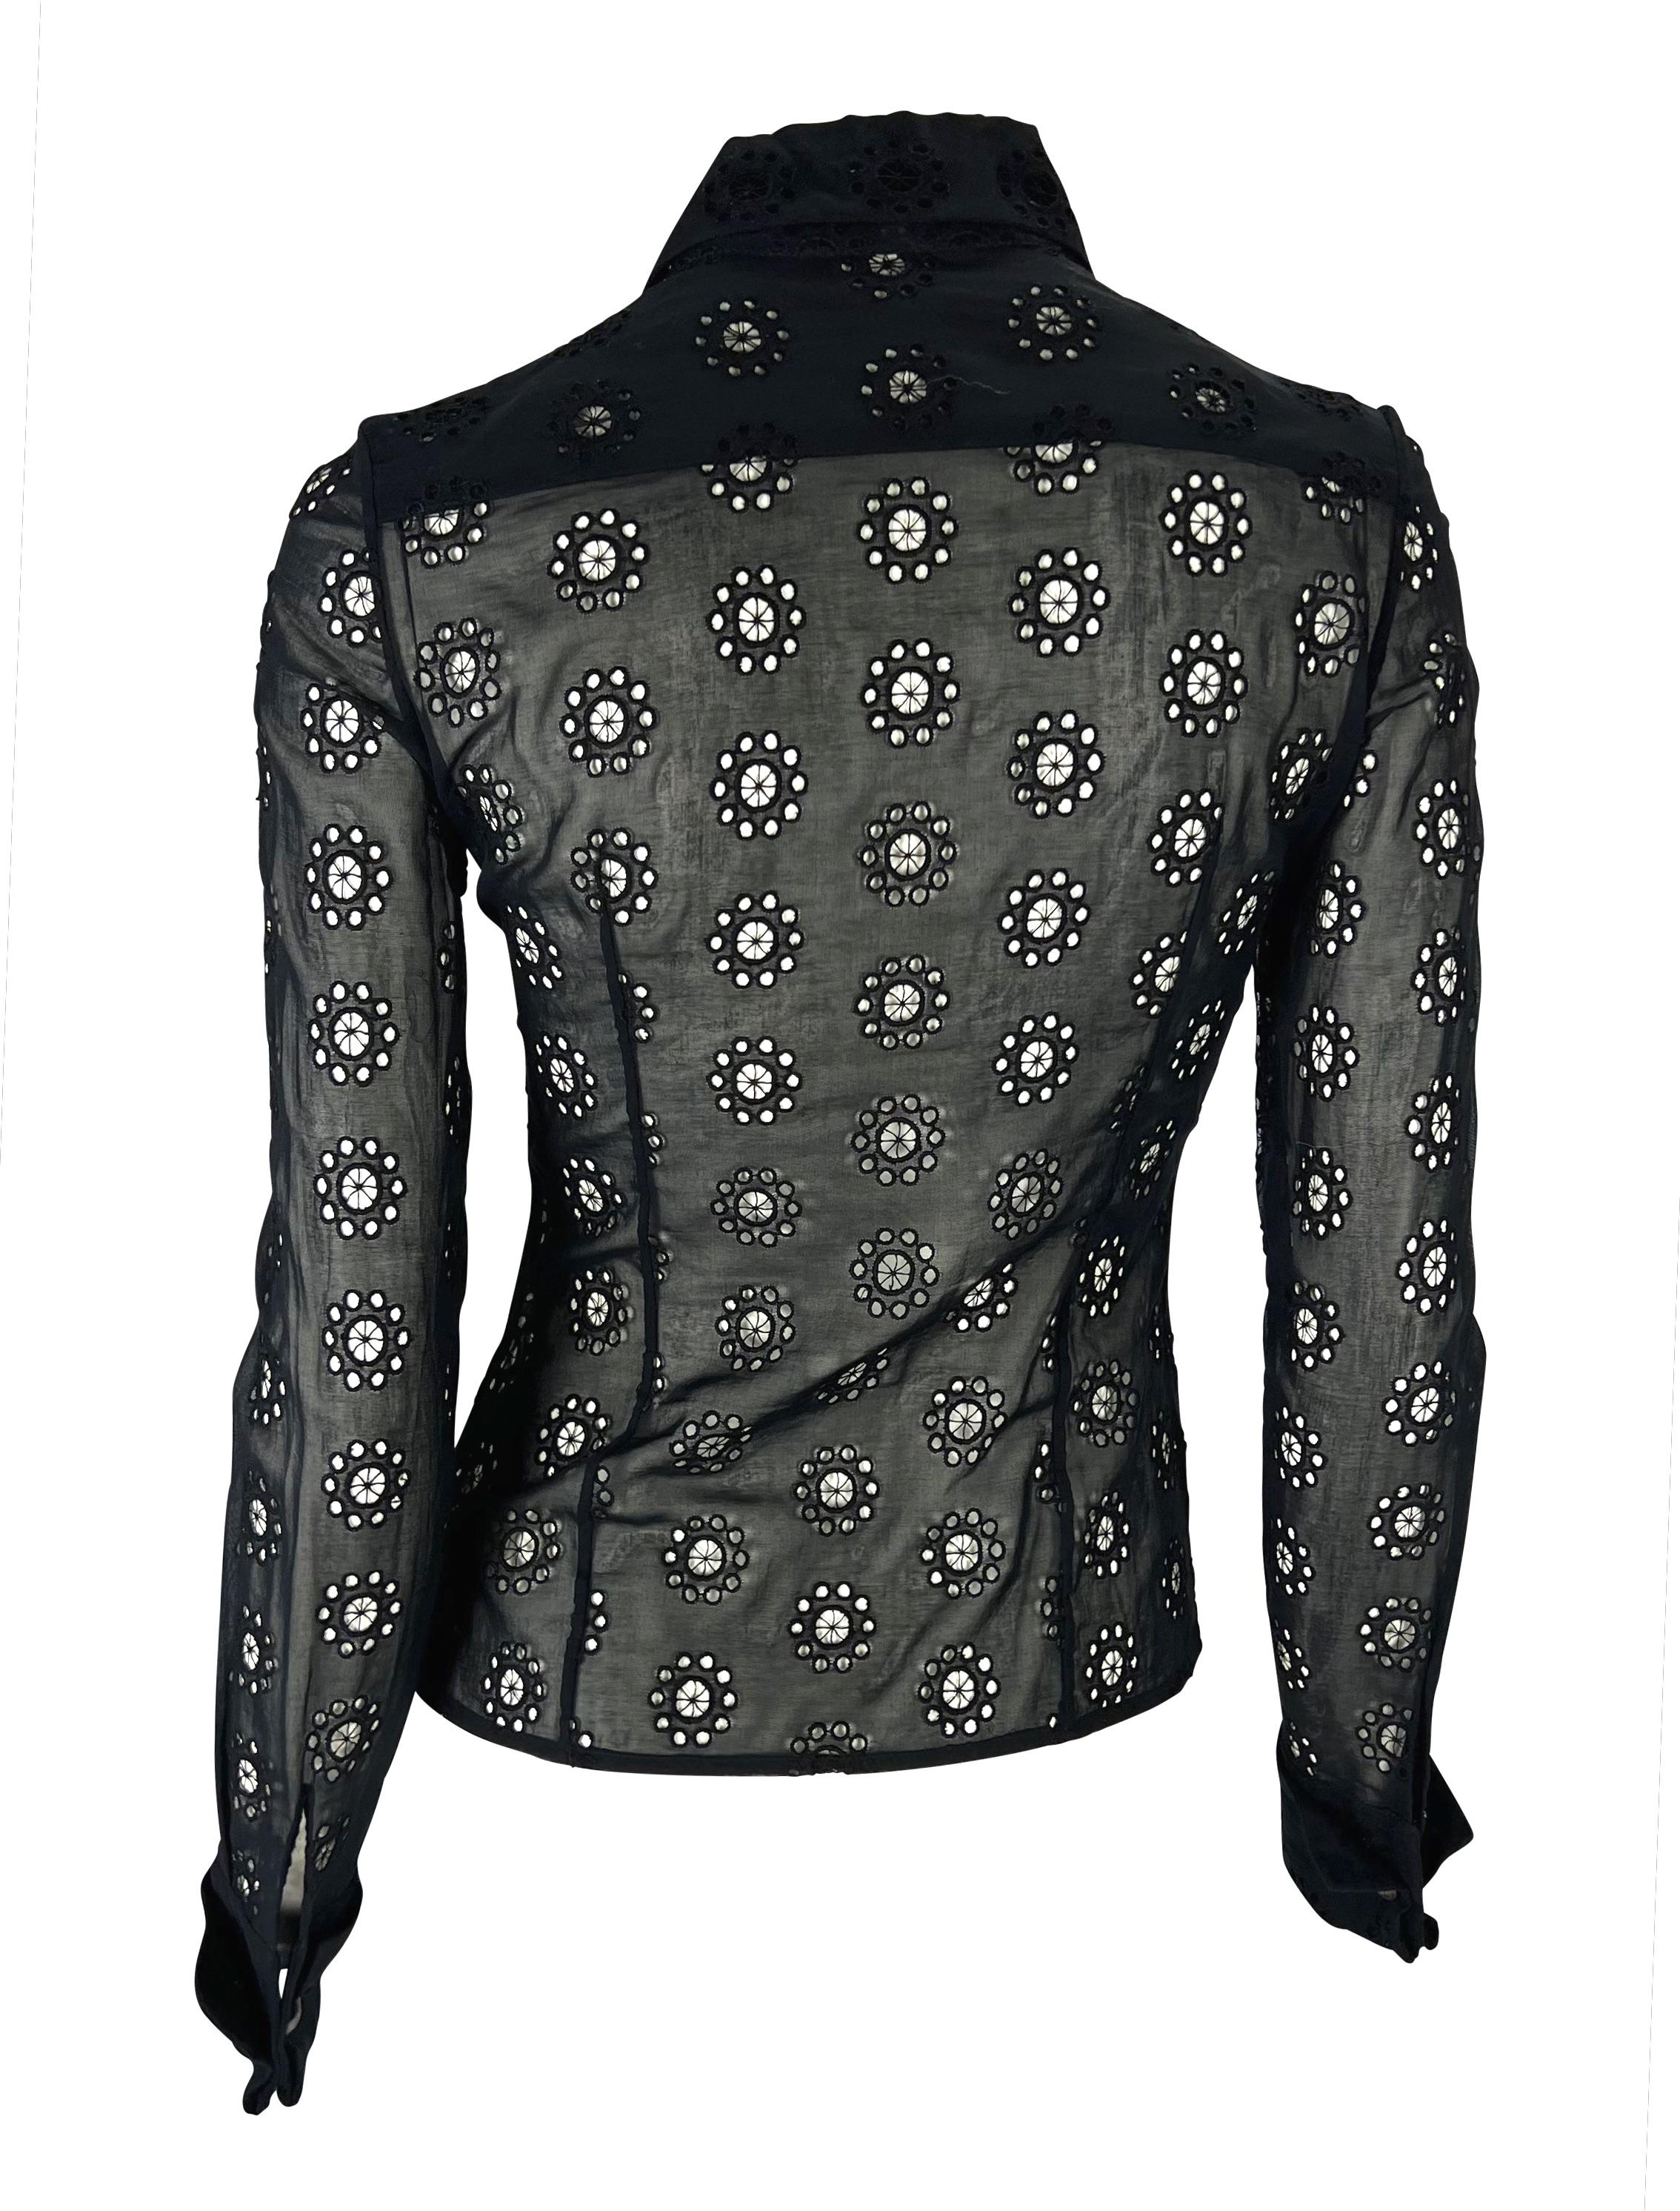 Women's S/S 2002 Gianni Versace by Donatella Sheer Eyelet French Cuff Button Up Top For Sale